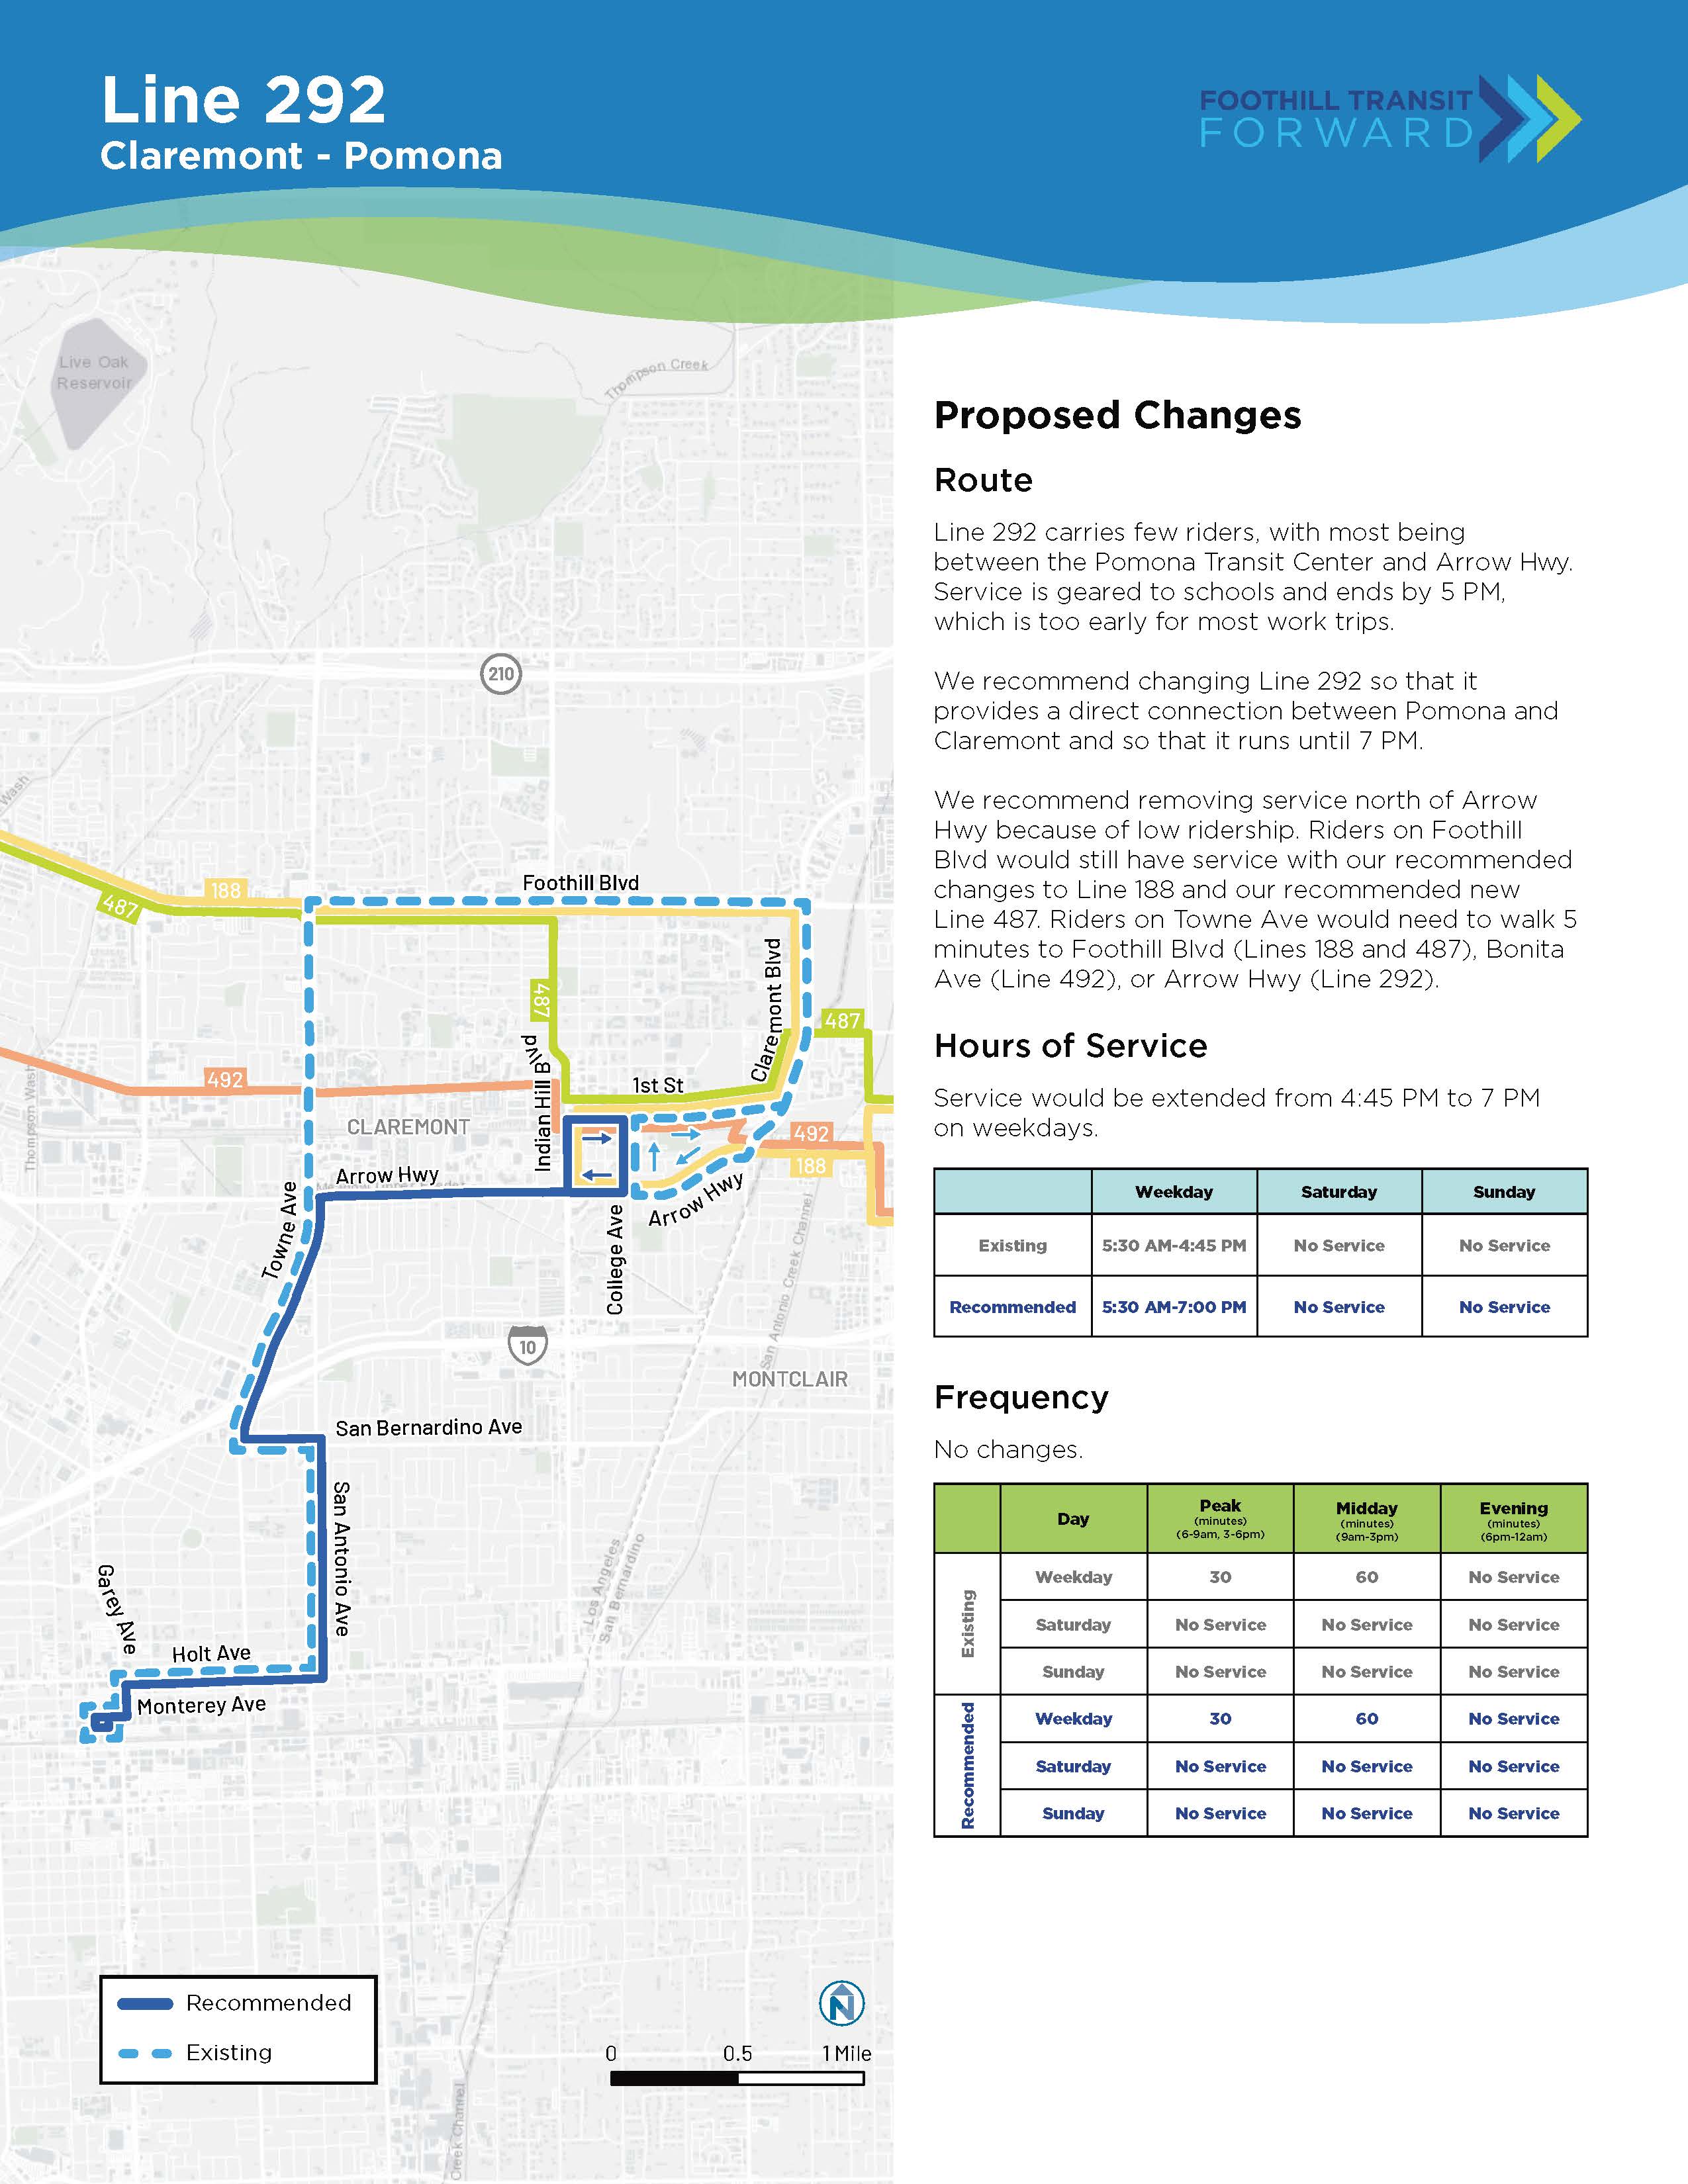 Proposed Changes: Most Line 292 riders go between Pomona Transit Center and Arrow Hwy.  Service ends by 5 PM. We recommend changing Line 292 to provide a direct connection between Pomona and Claremont and to run until 7 PM. We recommend removing service north of Arrow Hwy for low ridership. Riders on Foothill Blvd would have service with our recommended changes to Line 188 and our recommended Line 487. Riders on Towne would need to walk 5 minutes to Foothill, Bonita, or Arrow. Frequency: No changes.